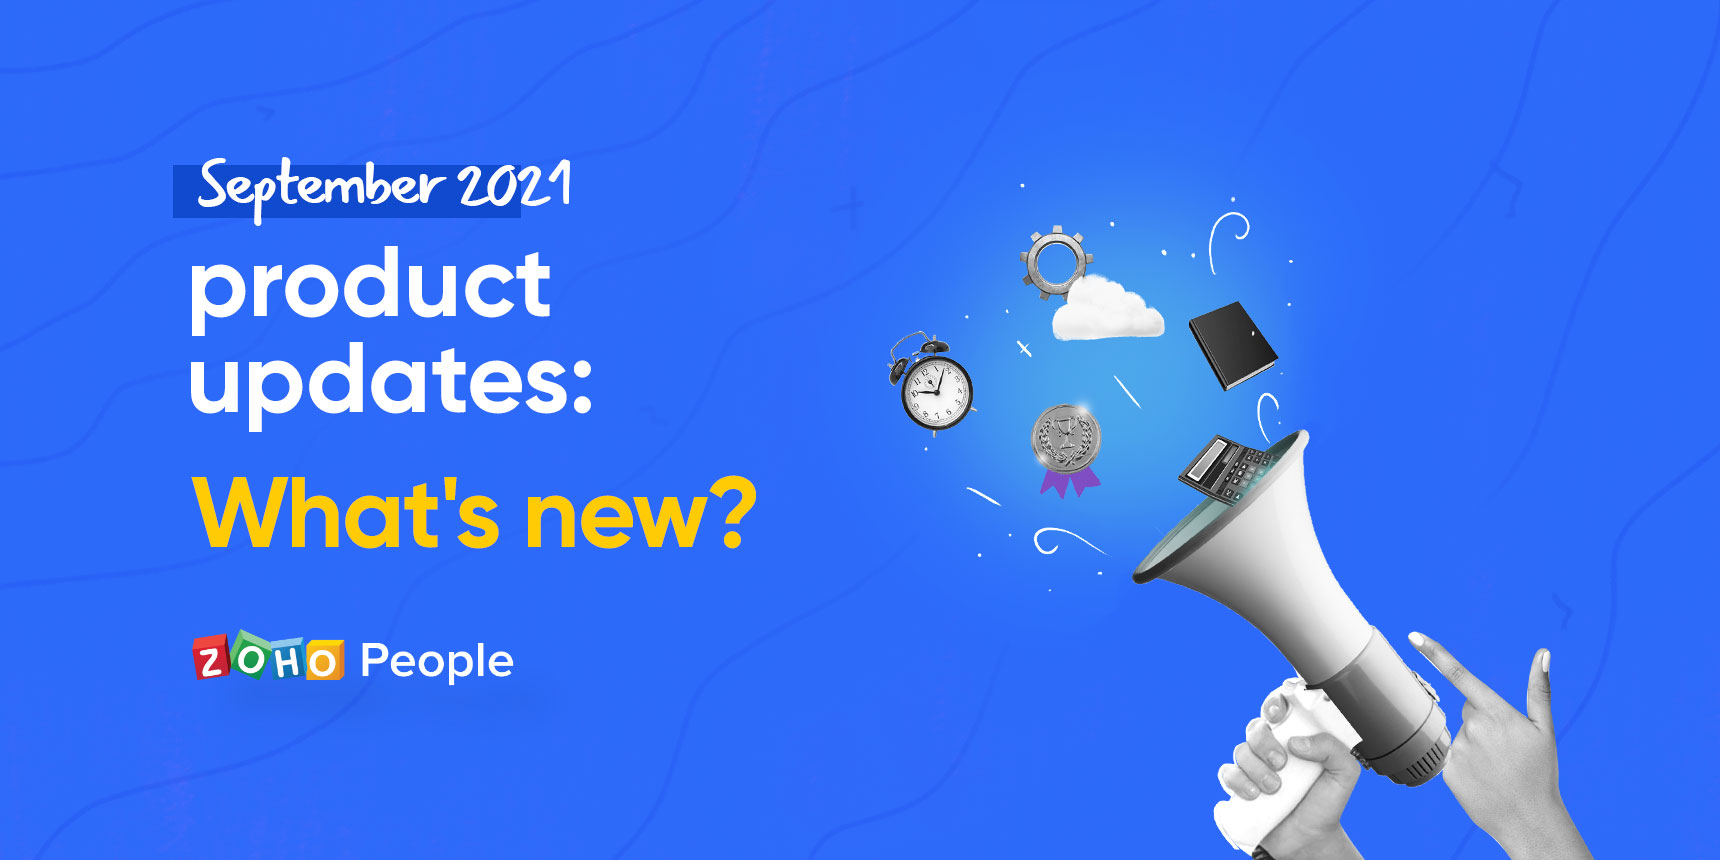 September 2021 product updates: What new in Zoho People?